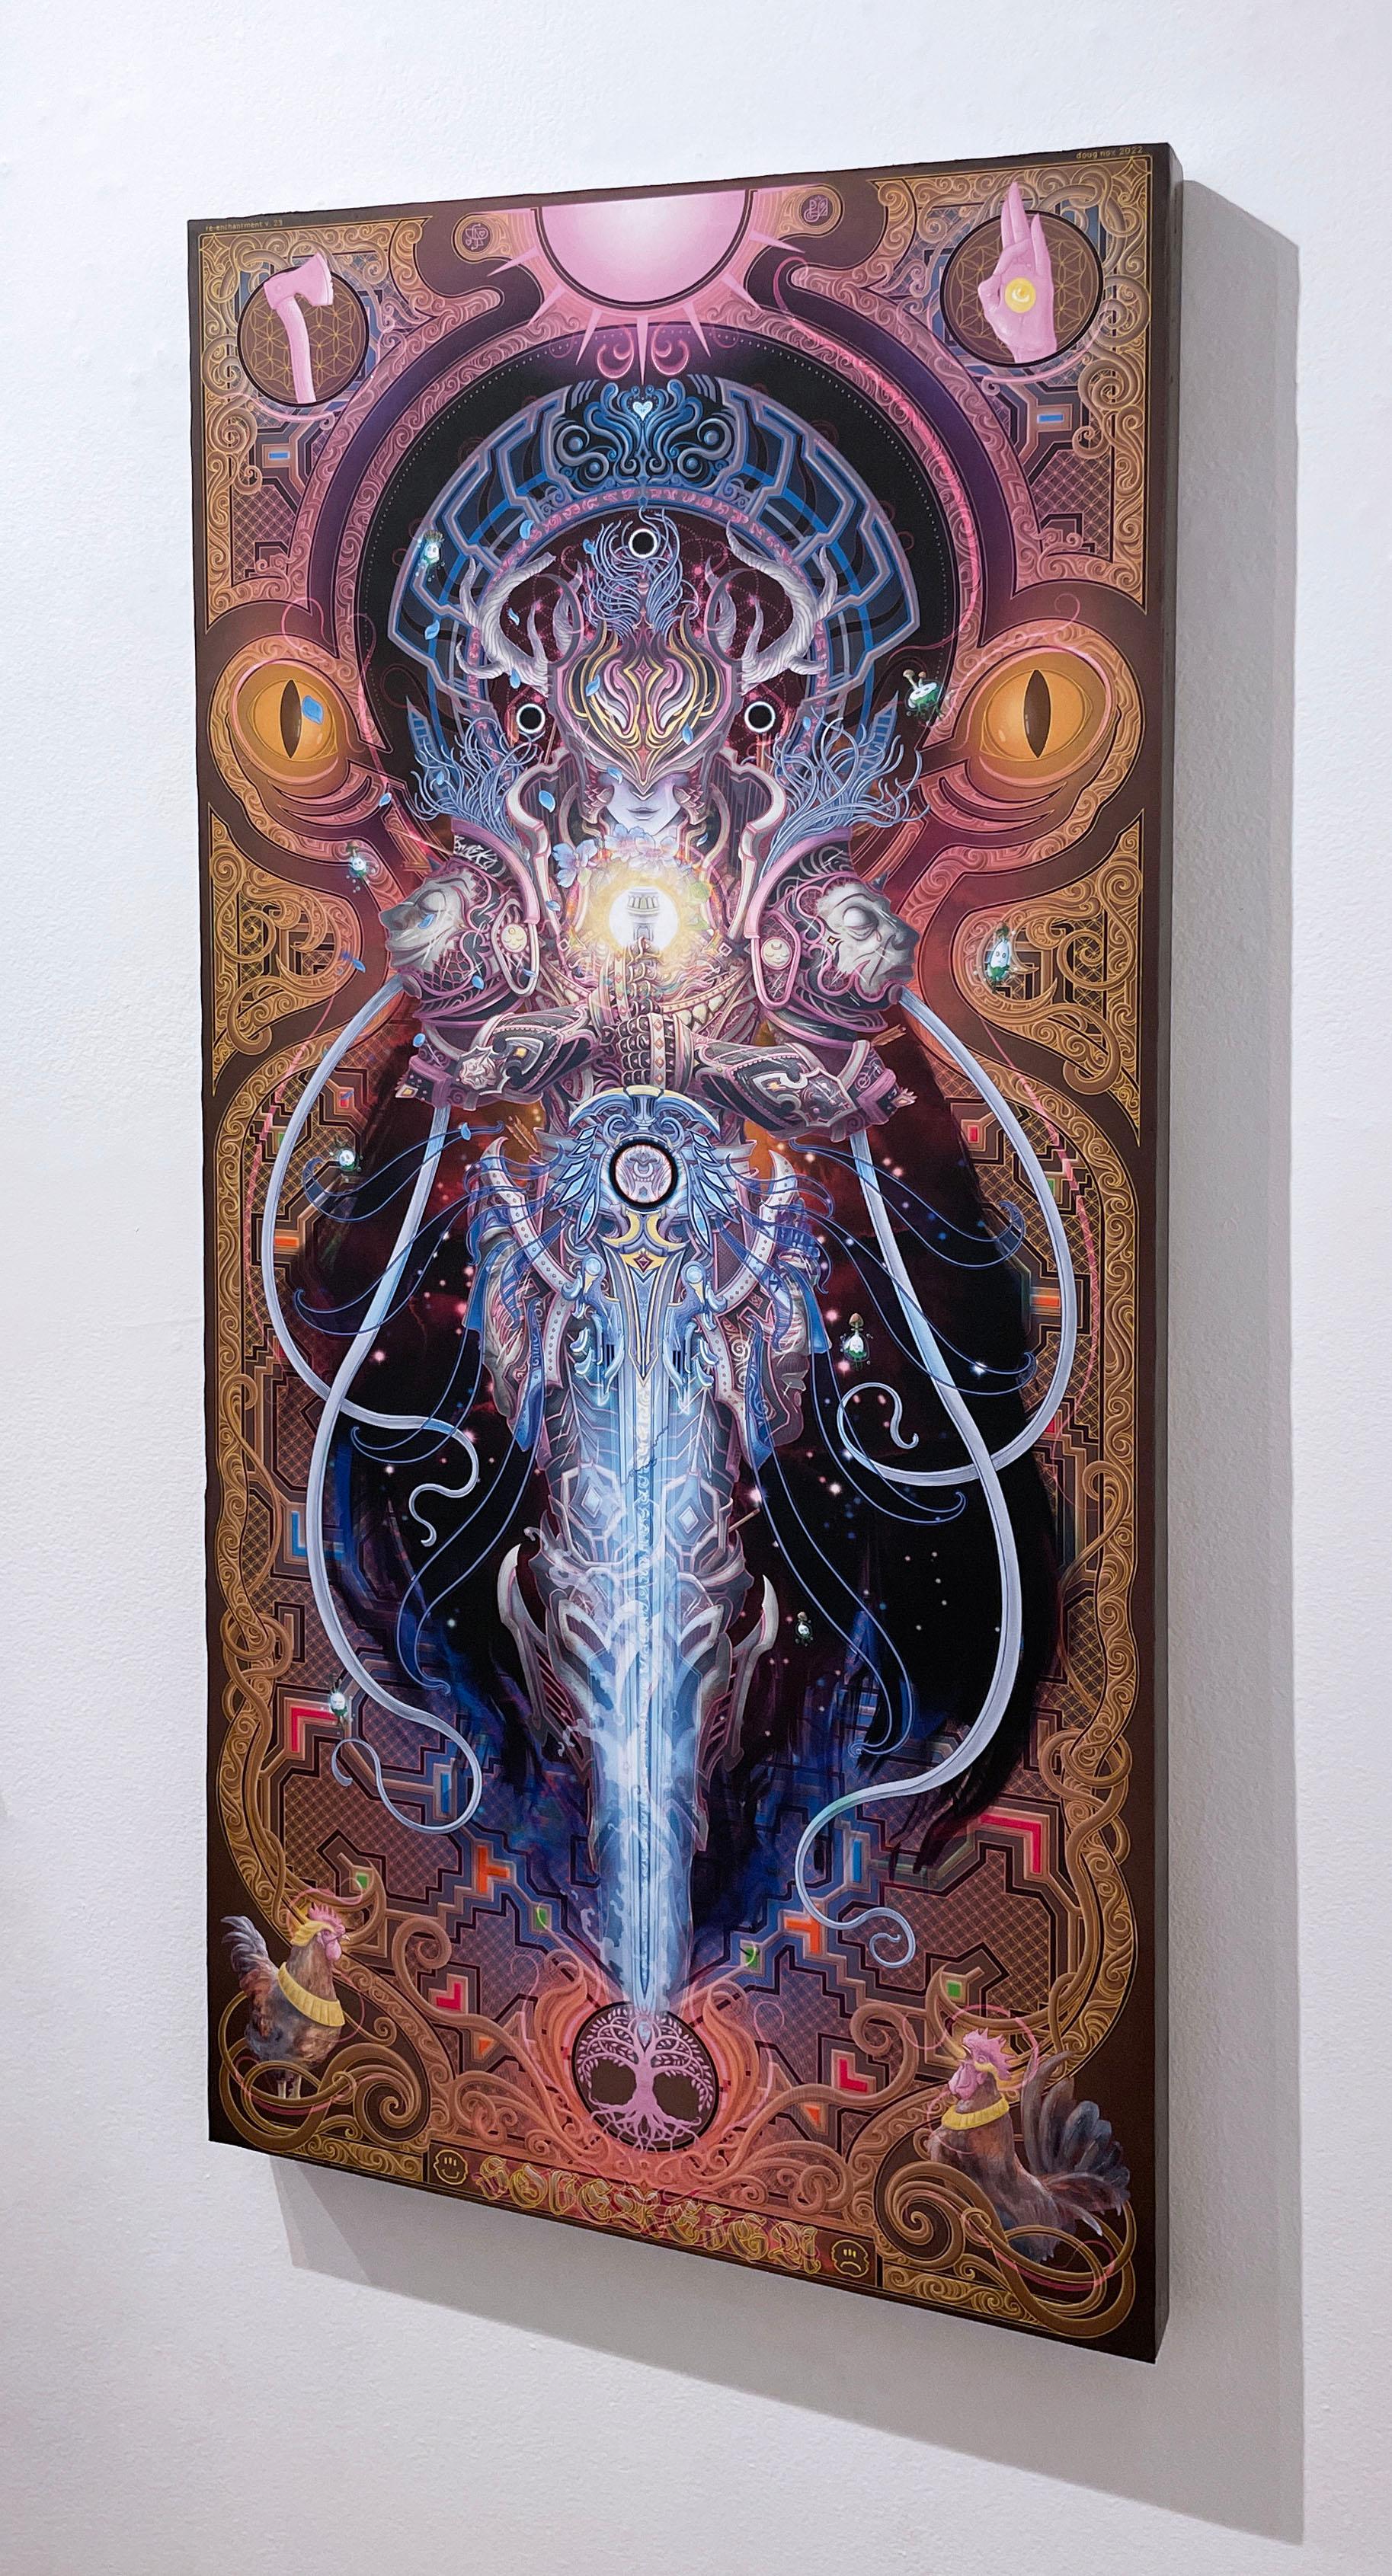 Sovereign Sword (2022) by Doug Nox (Harlequinade), psychedelic, cosmic, giclée For Sale 1